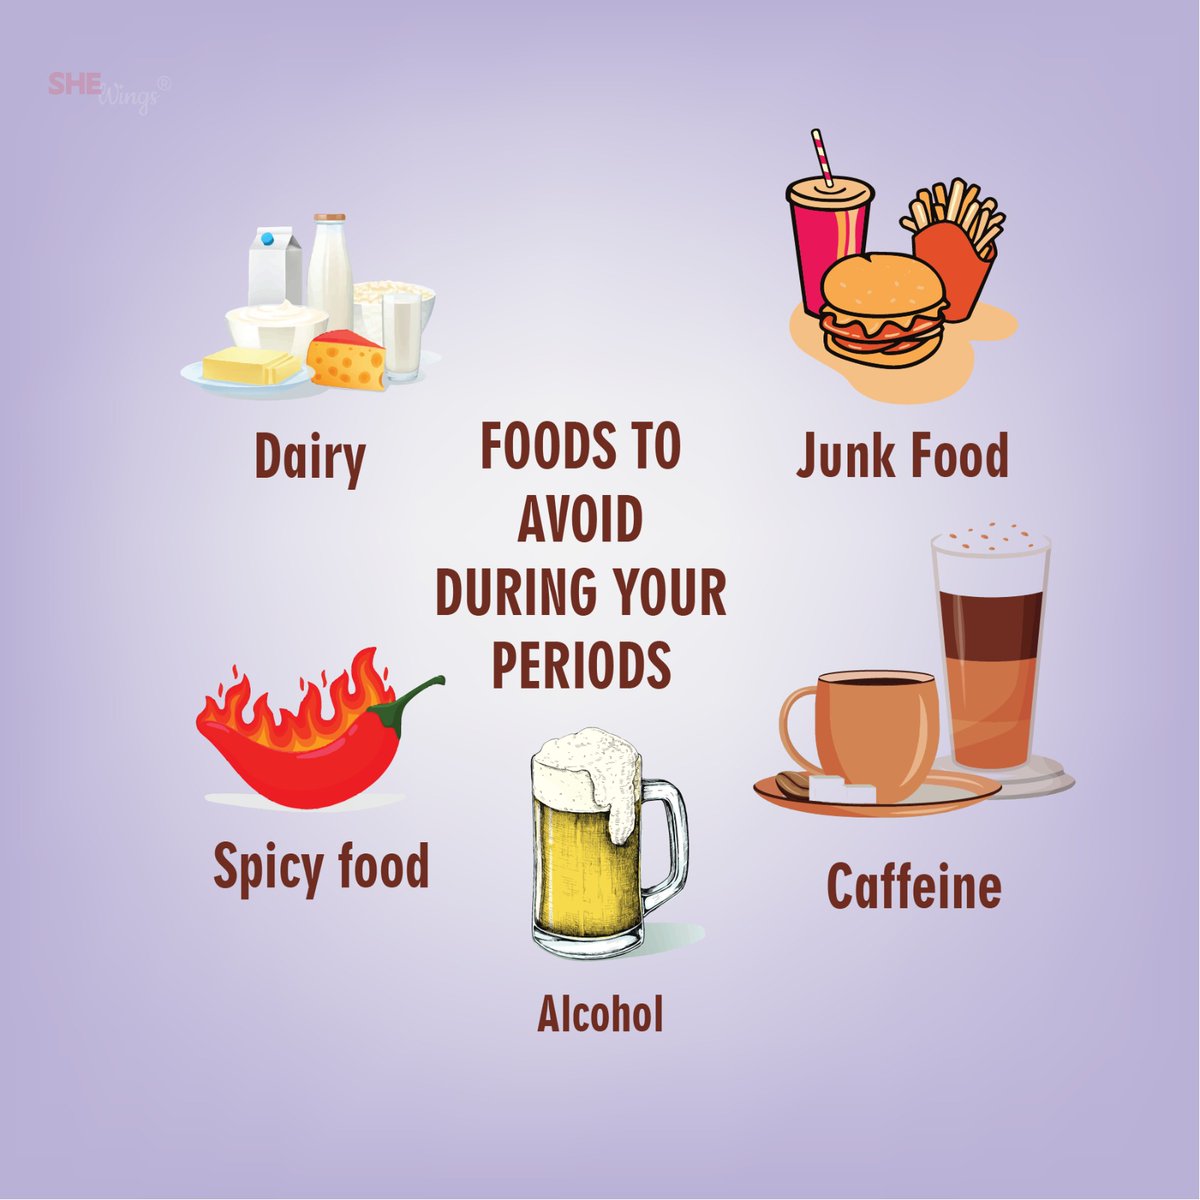 On your periods? Keep in mind a few things you should not consume during that time of the month.

#healthyperiod #hormonalchanges #safeperiod #menstruation #shewings_pc